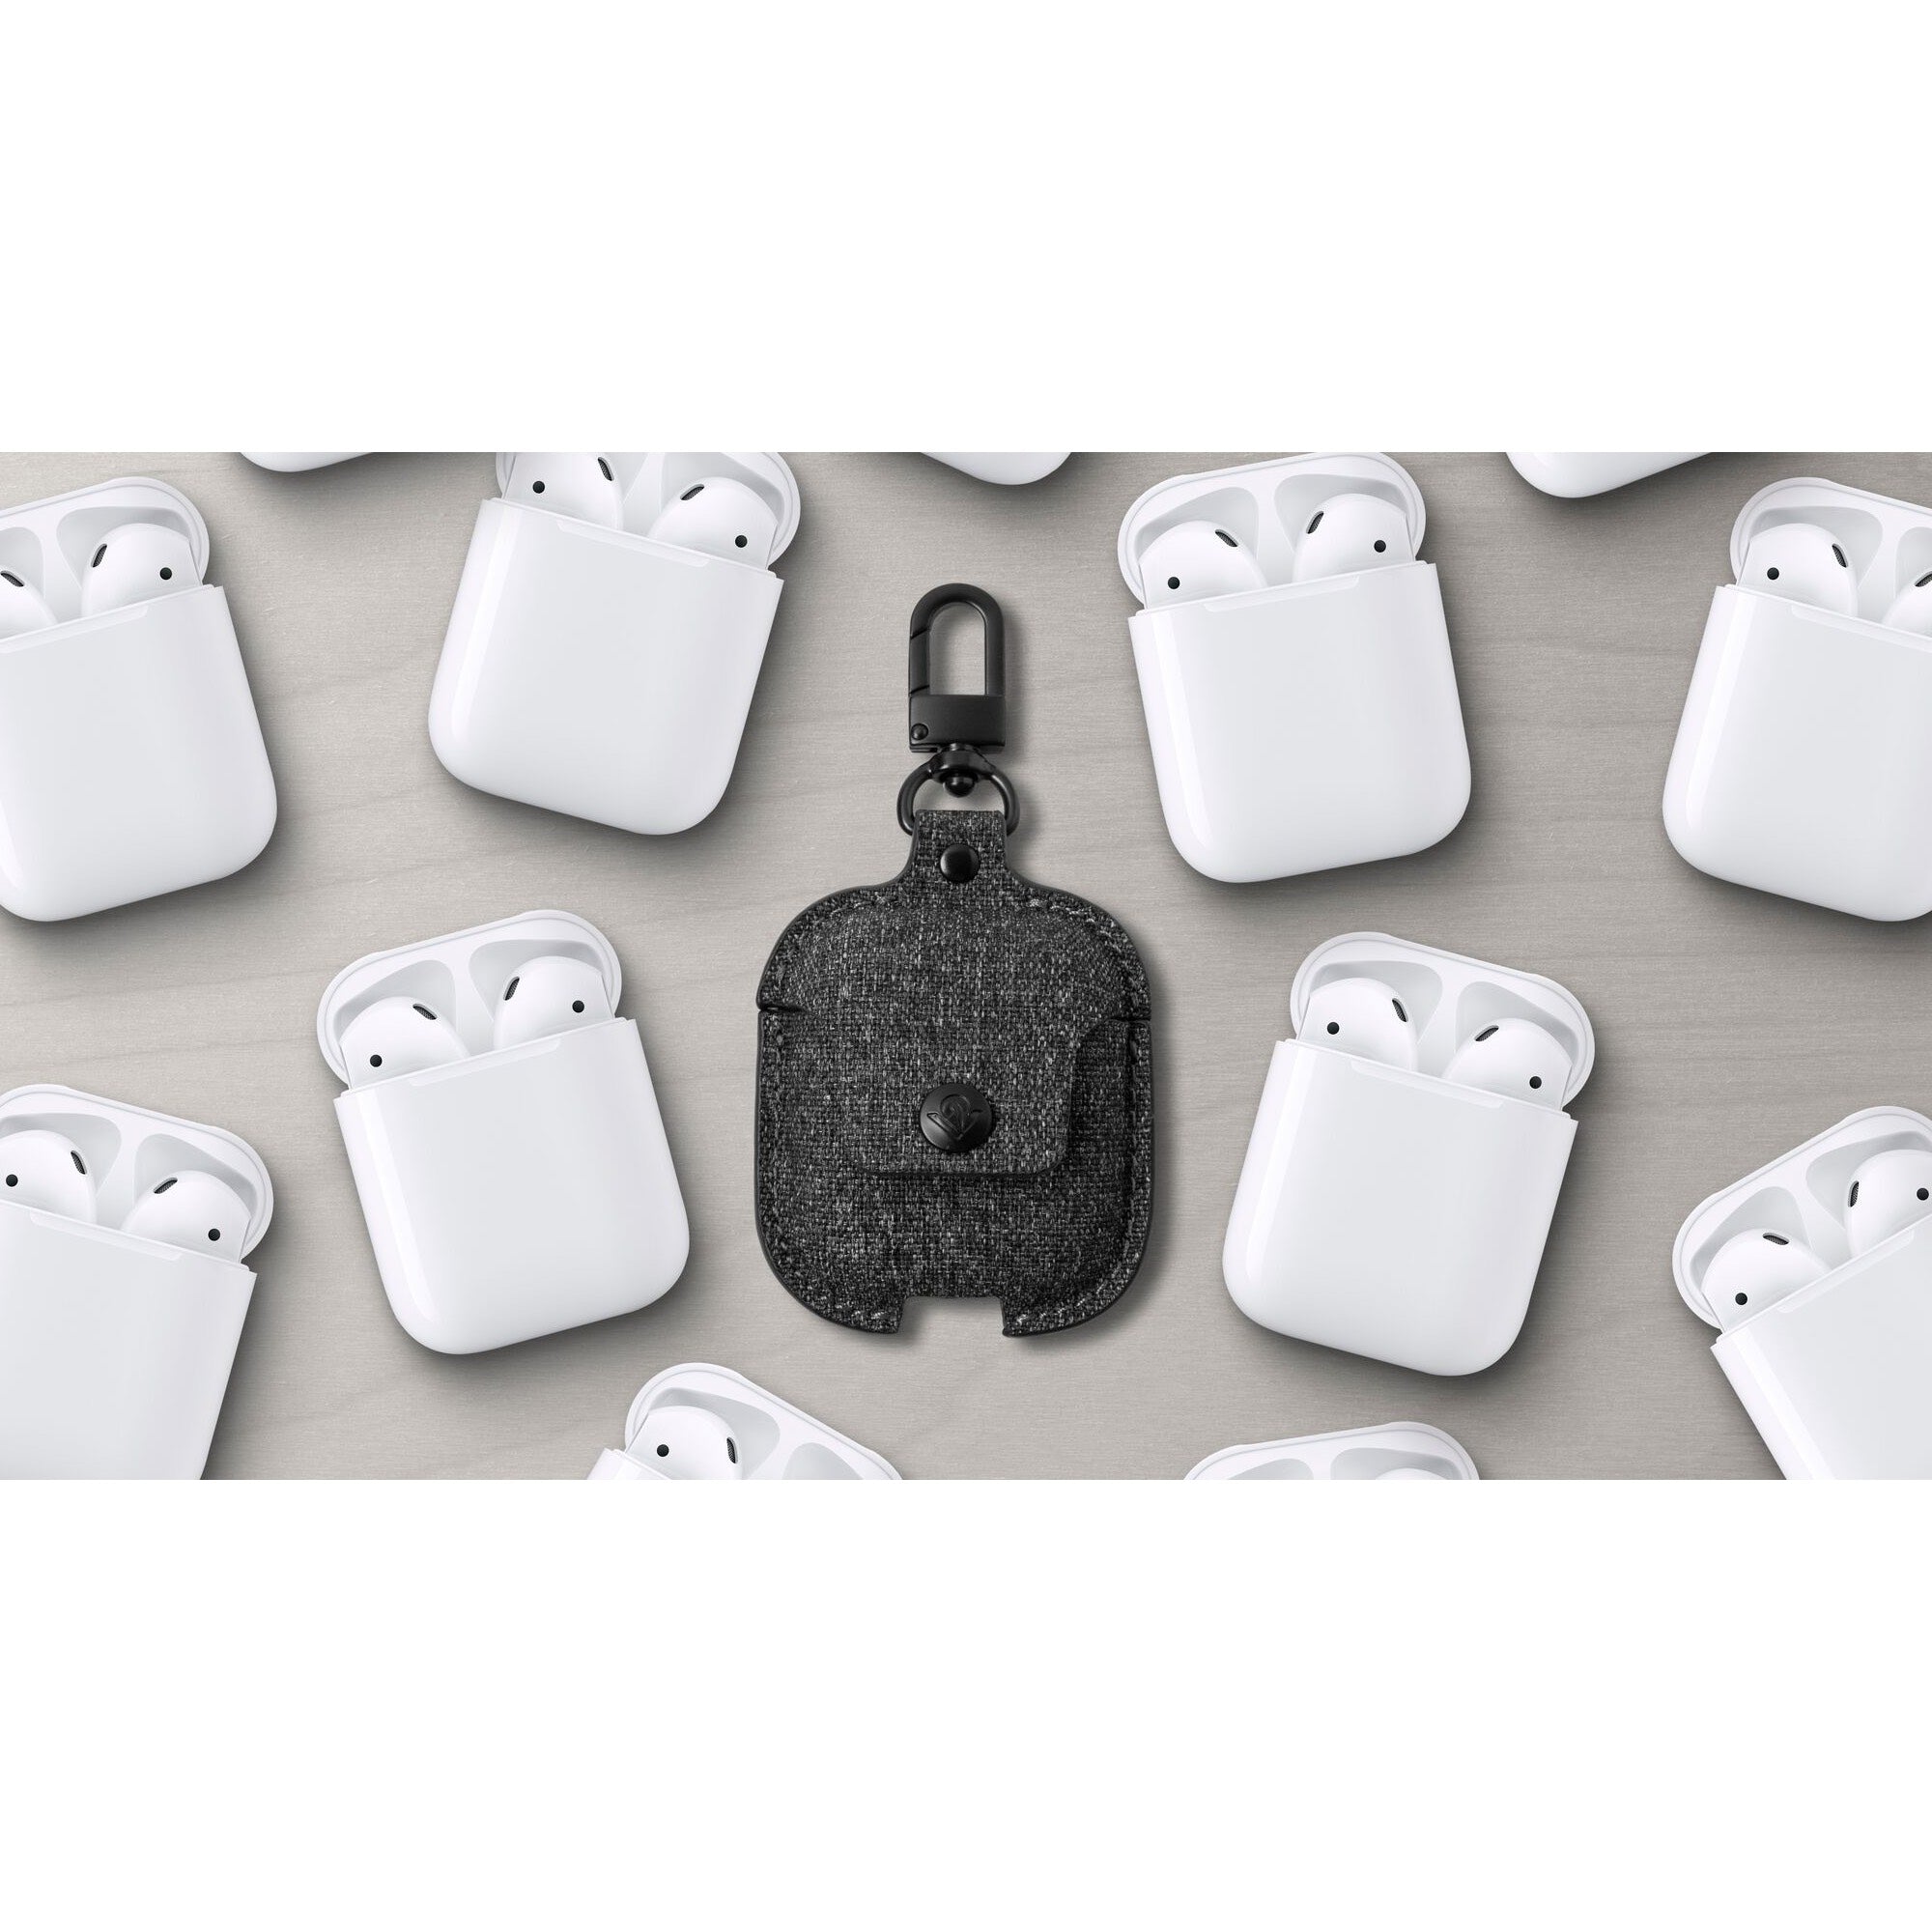 AirSnap Twill for AirPods - Smoke